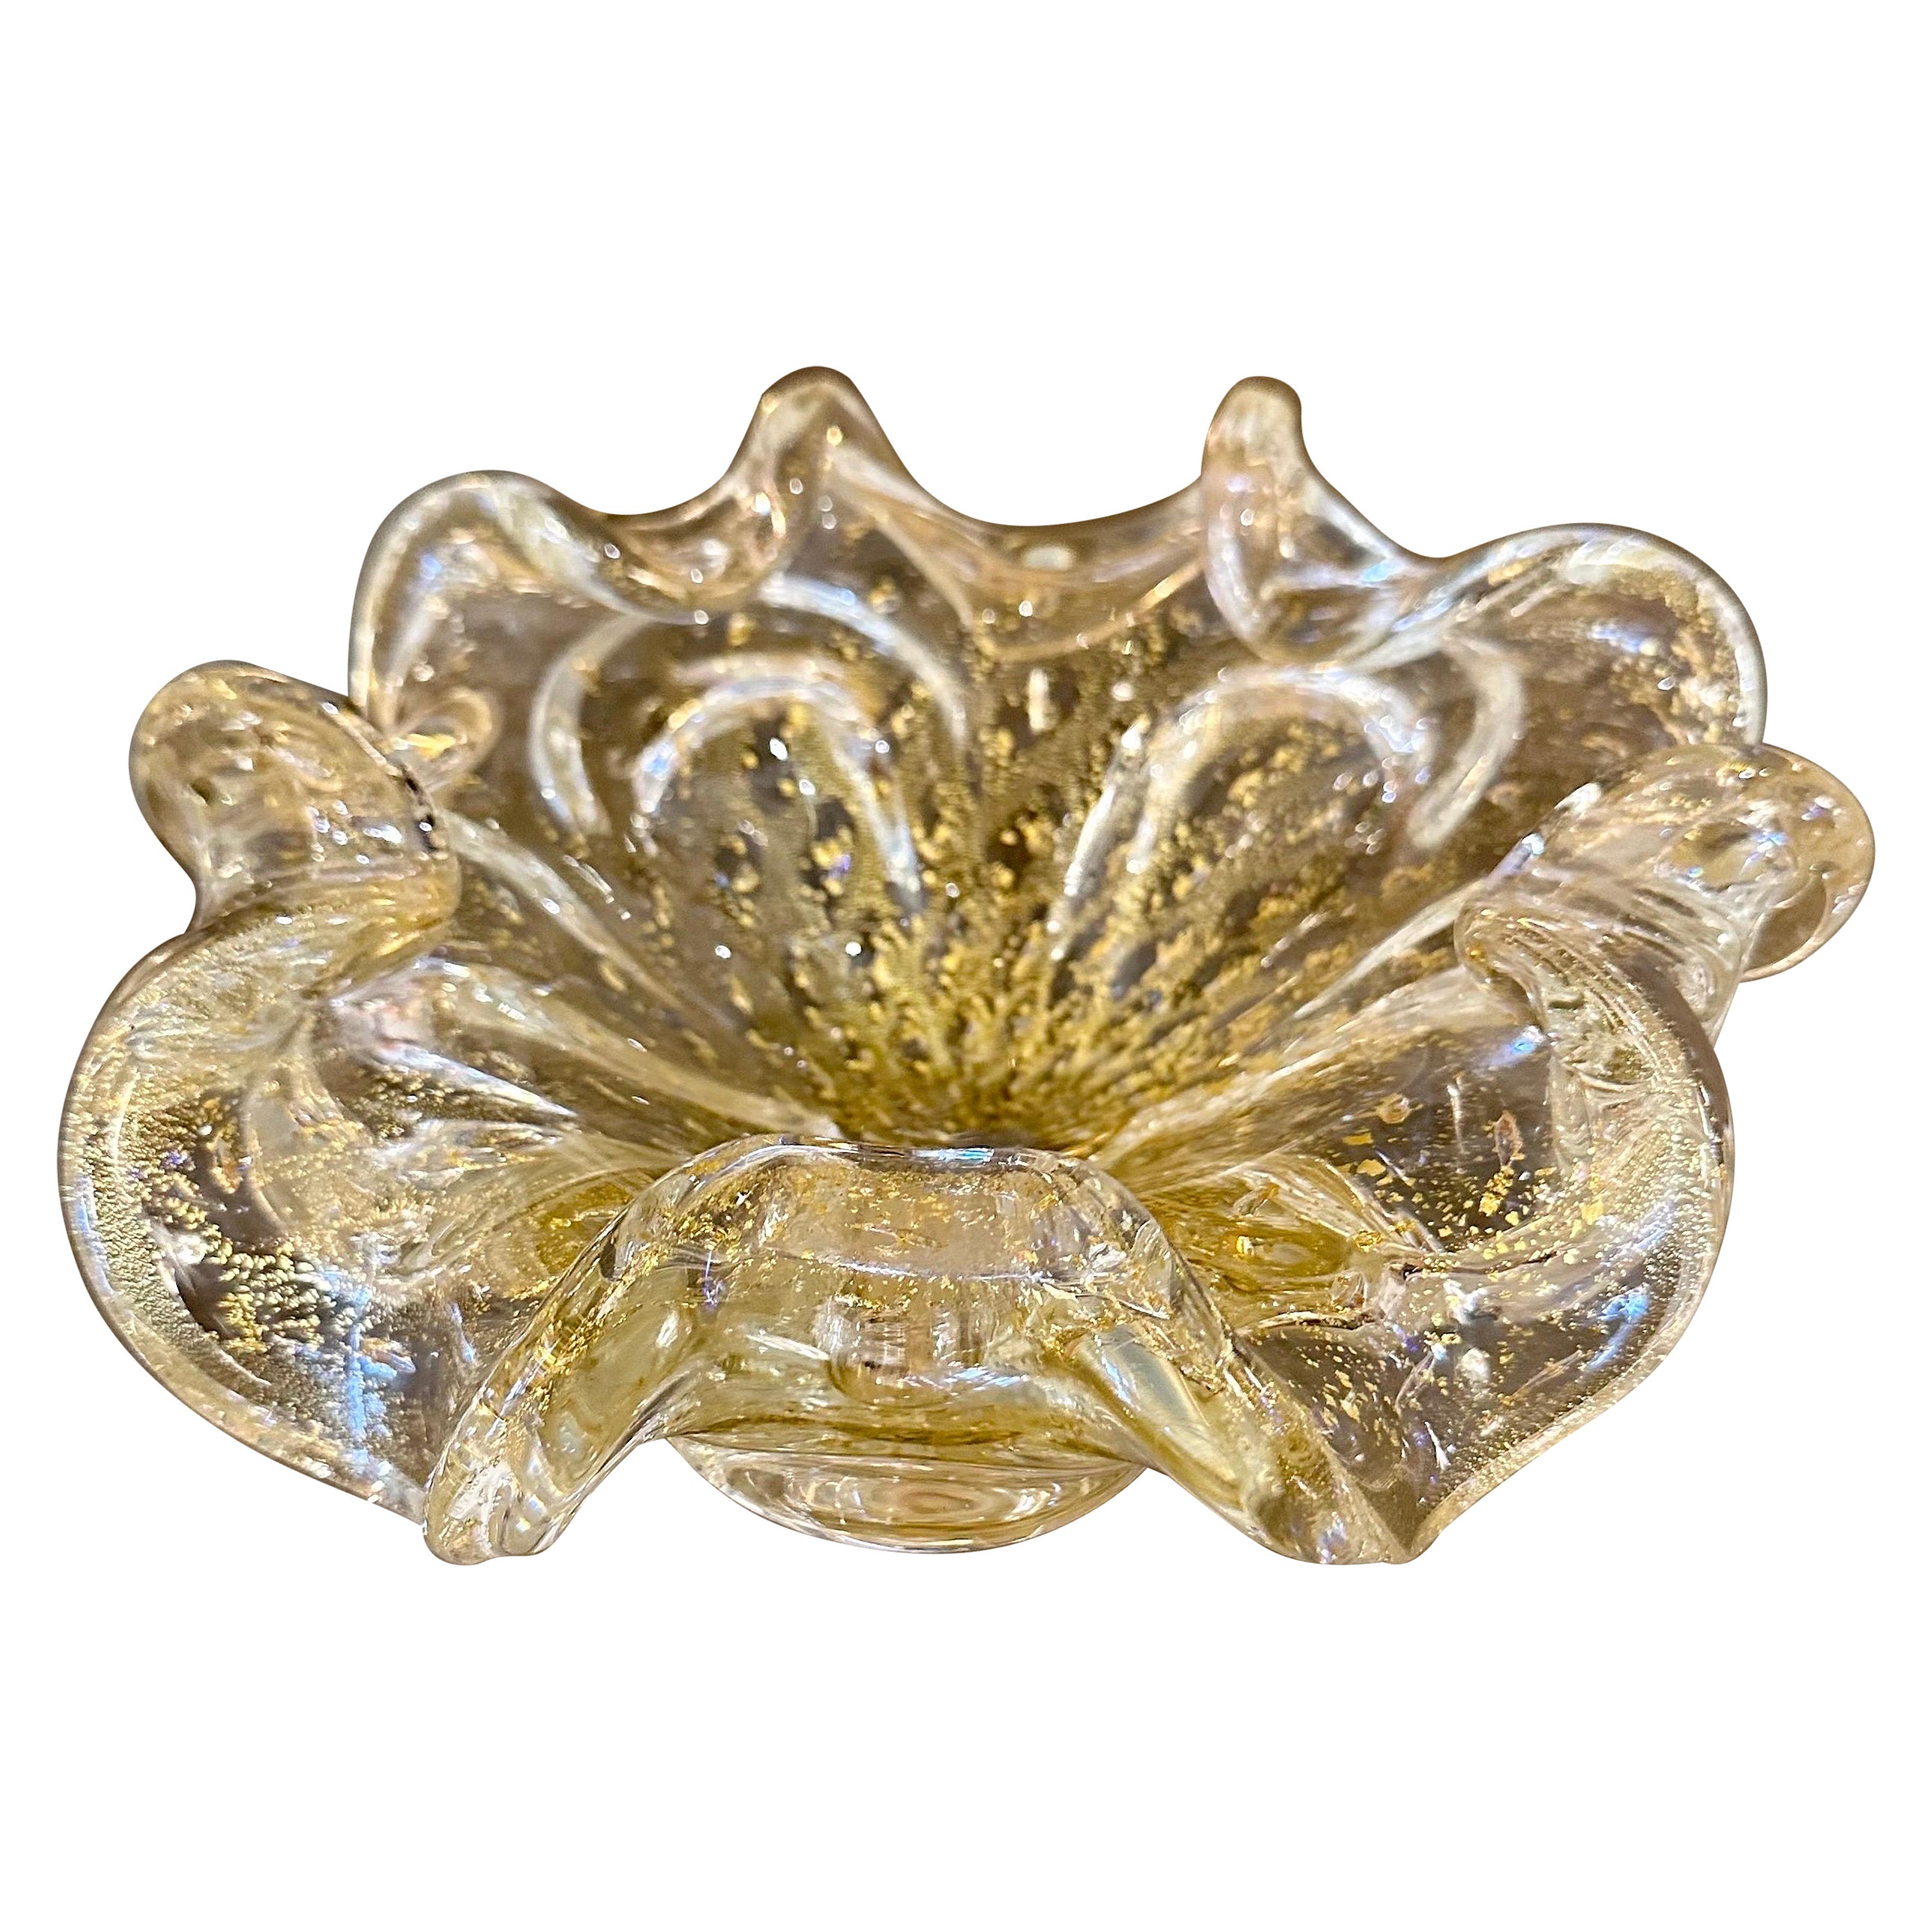 Barovier Tosso Murano Glass Centerpiece with Gold Inclusion  For Sale